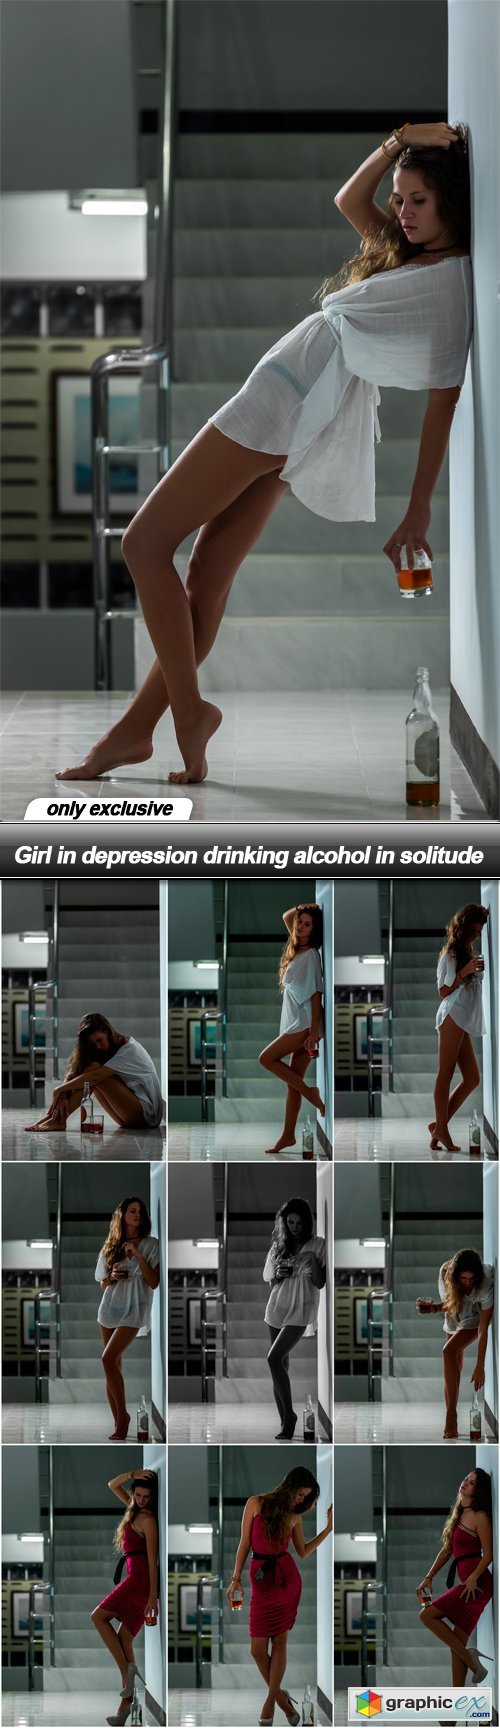 Girl in depression drinking alcohol in solitude - 10 UHQ JPEG